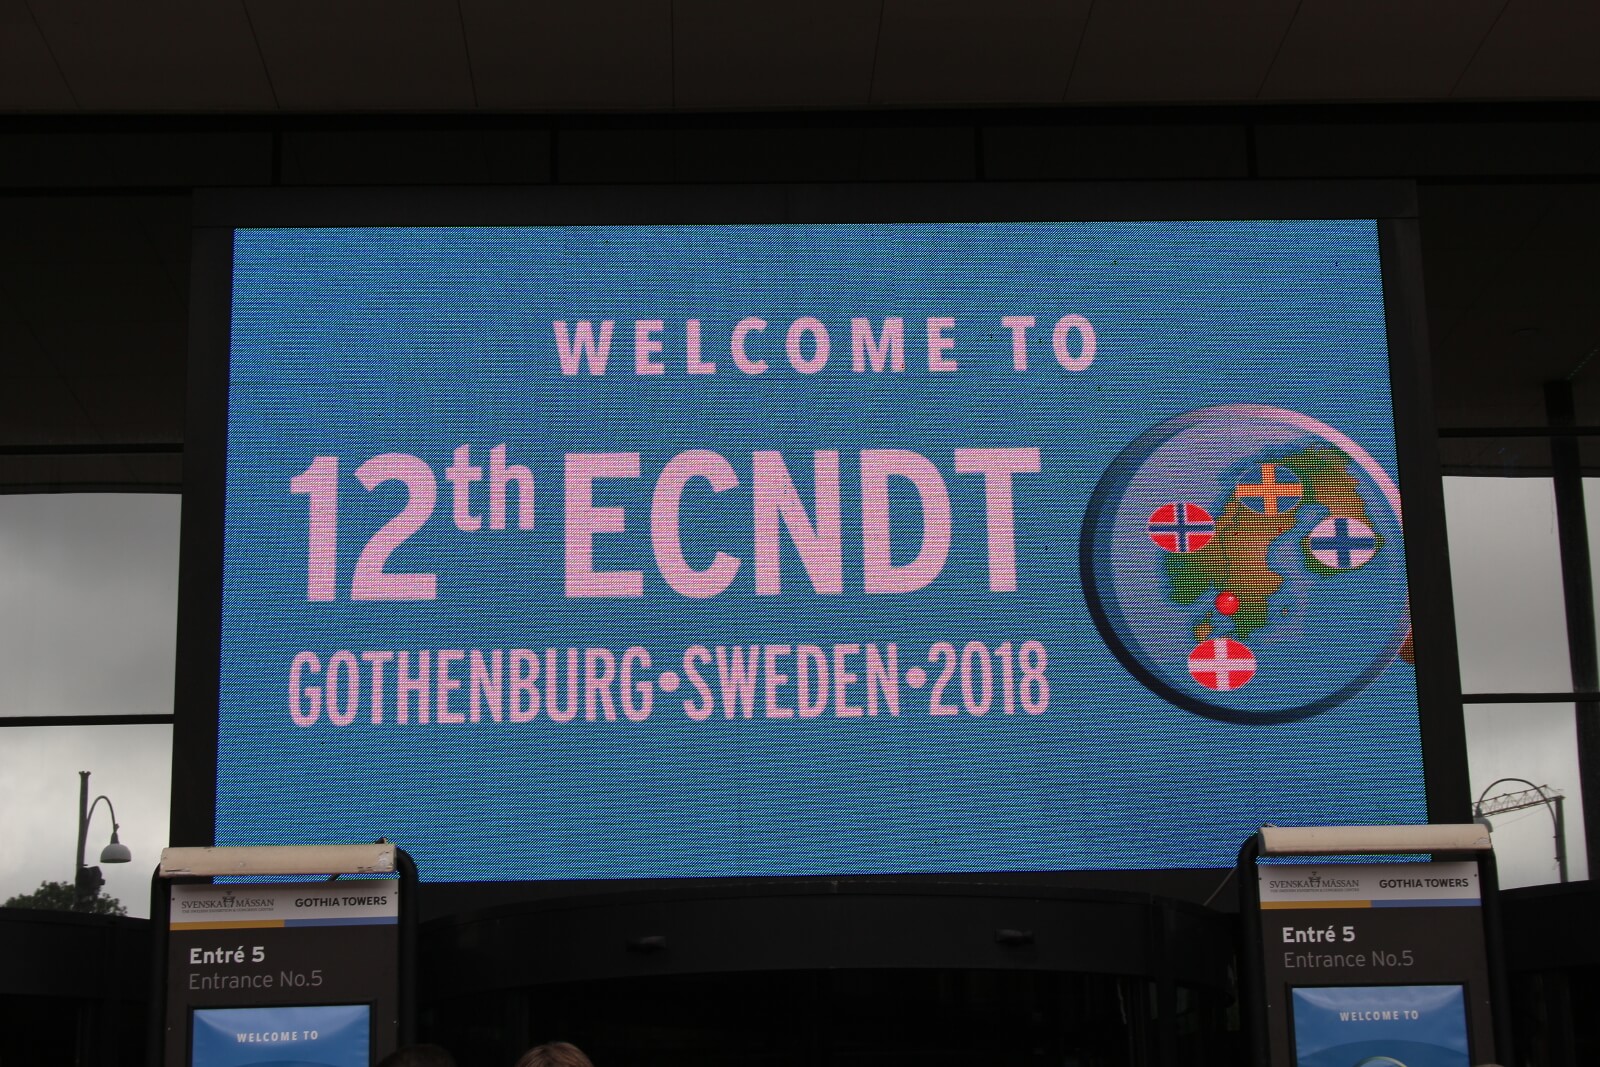 Welcome display of the European conference of NDT 2018 (ECNDT)